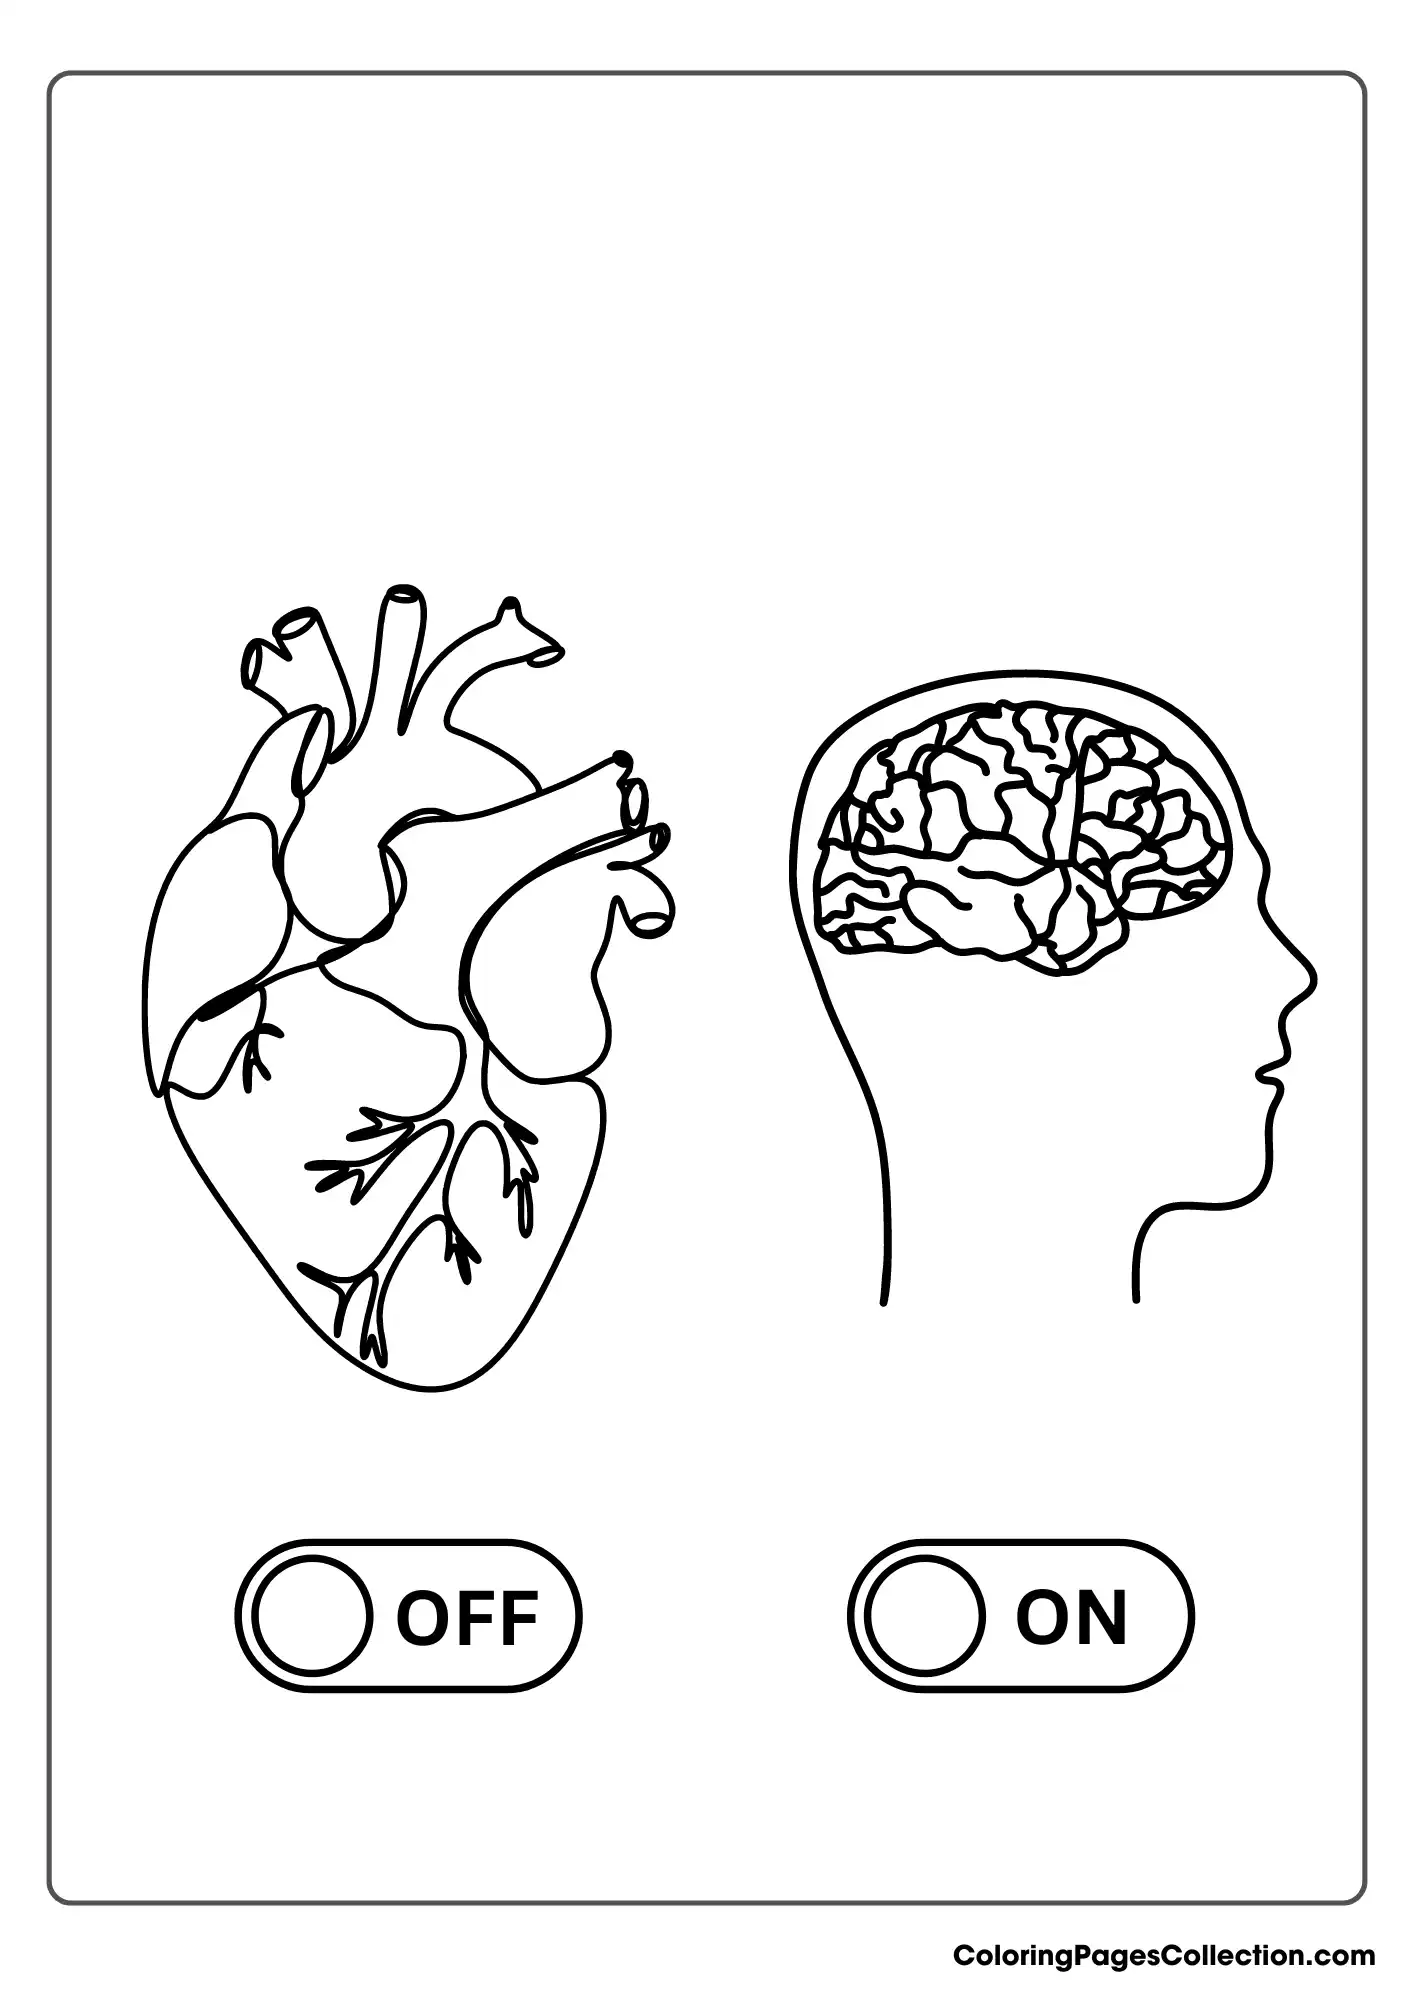 Coloring pages for teens, Heart Off, Brain On